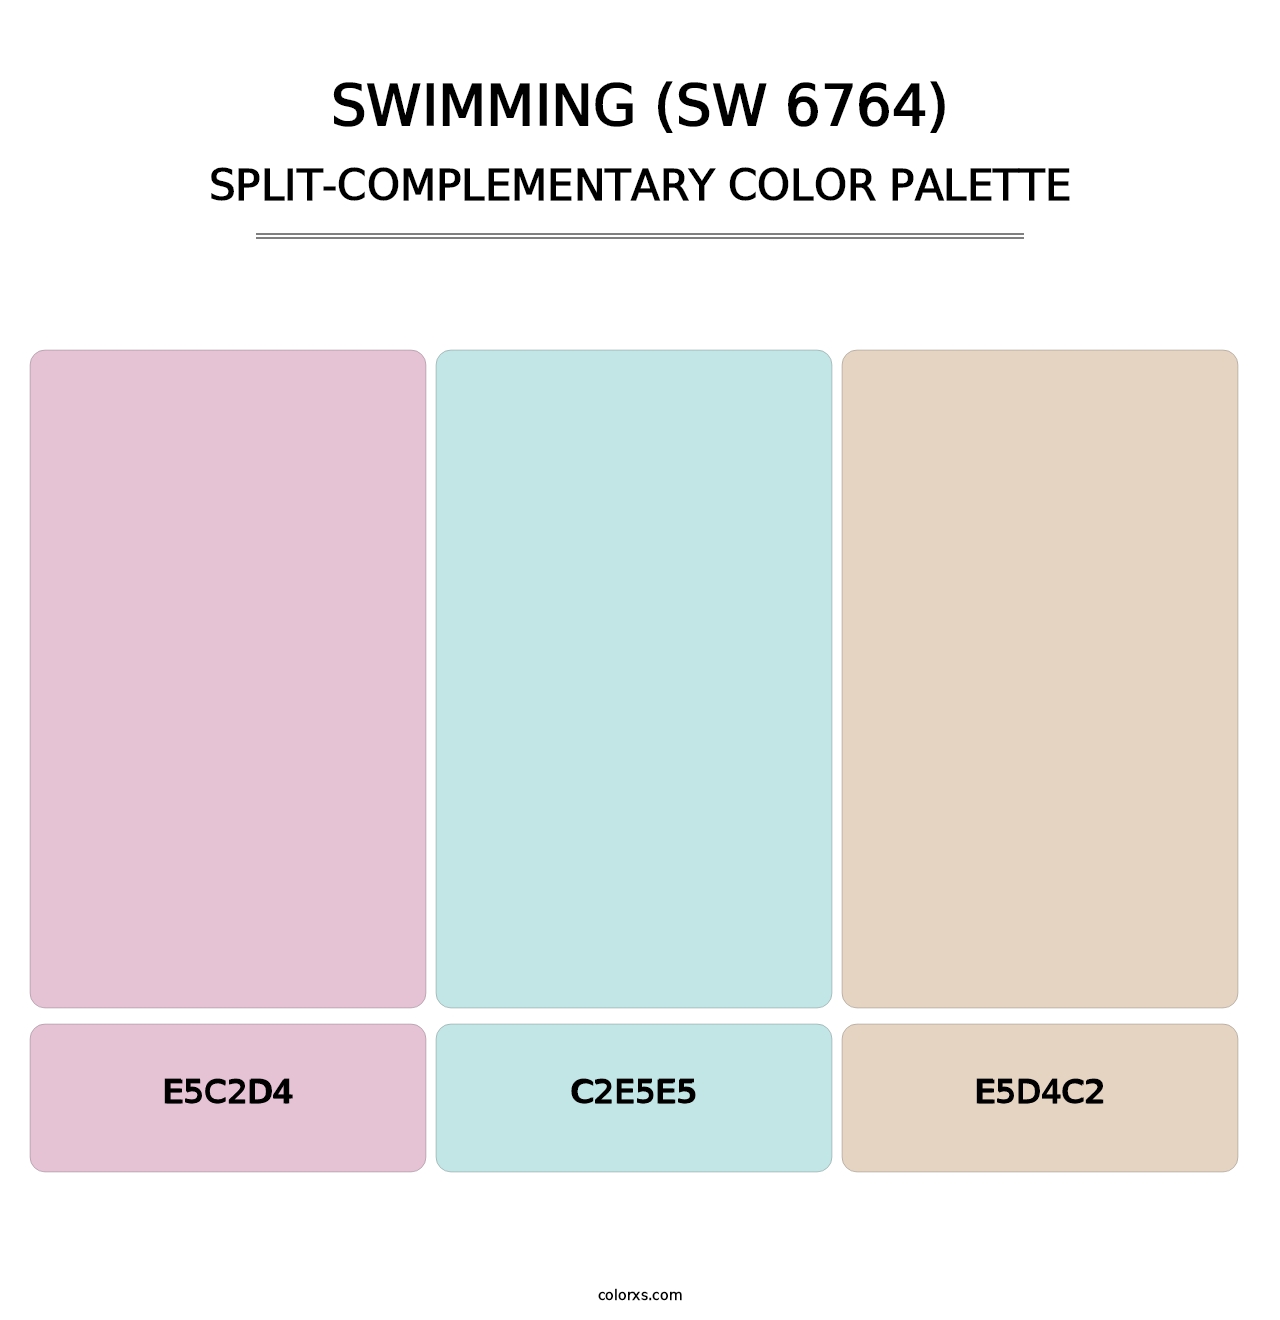 Swimming (SW 6764) - Split-Complementary Color Palette